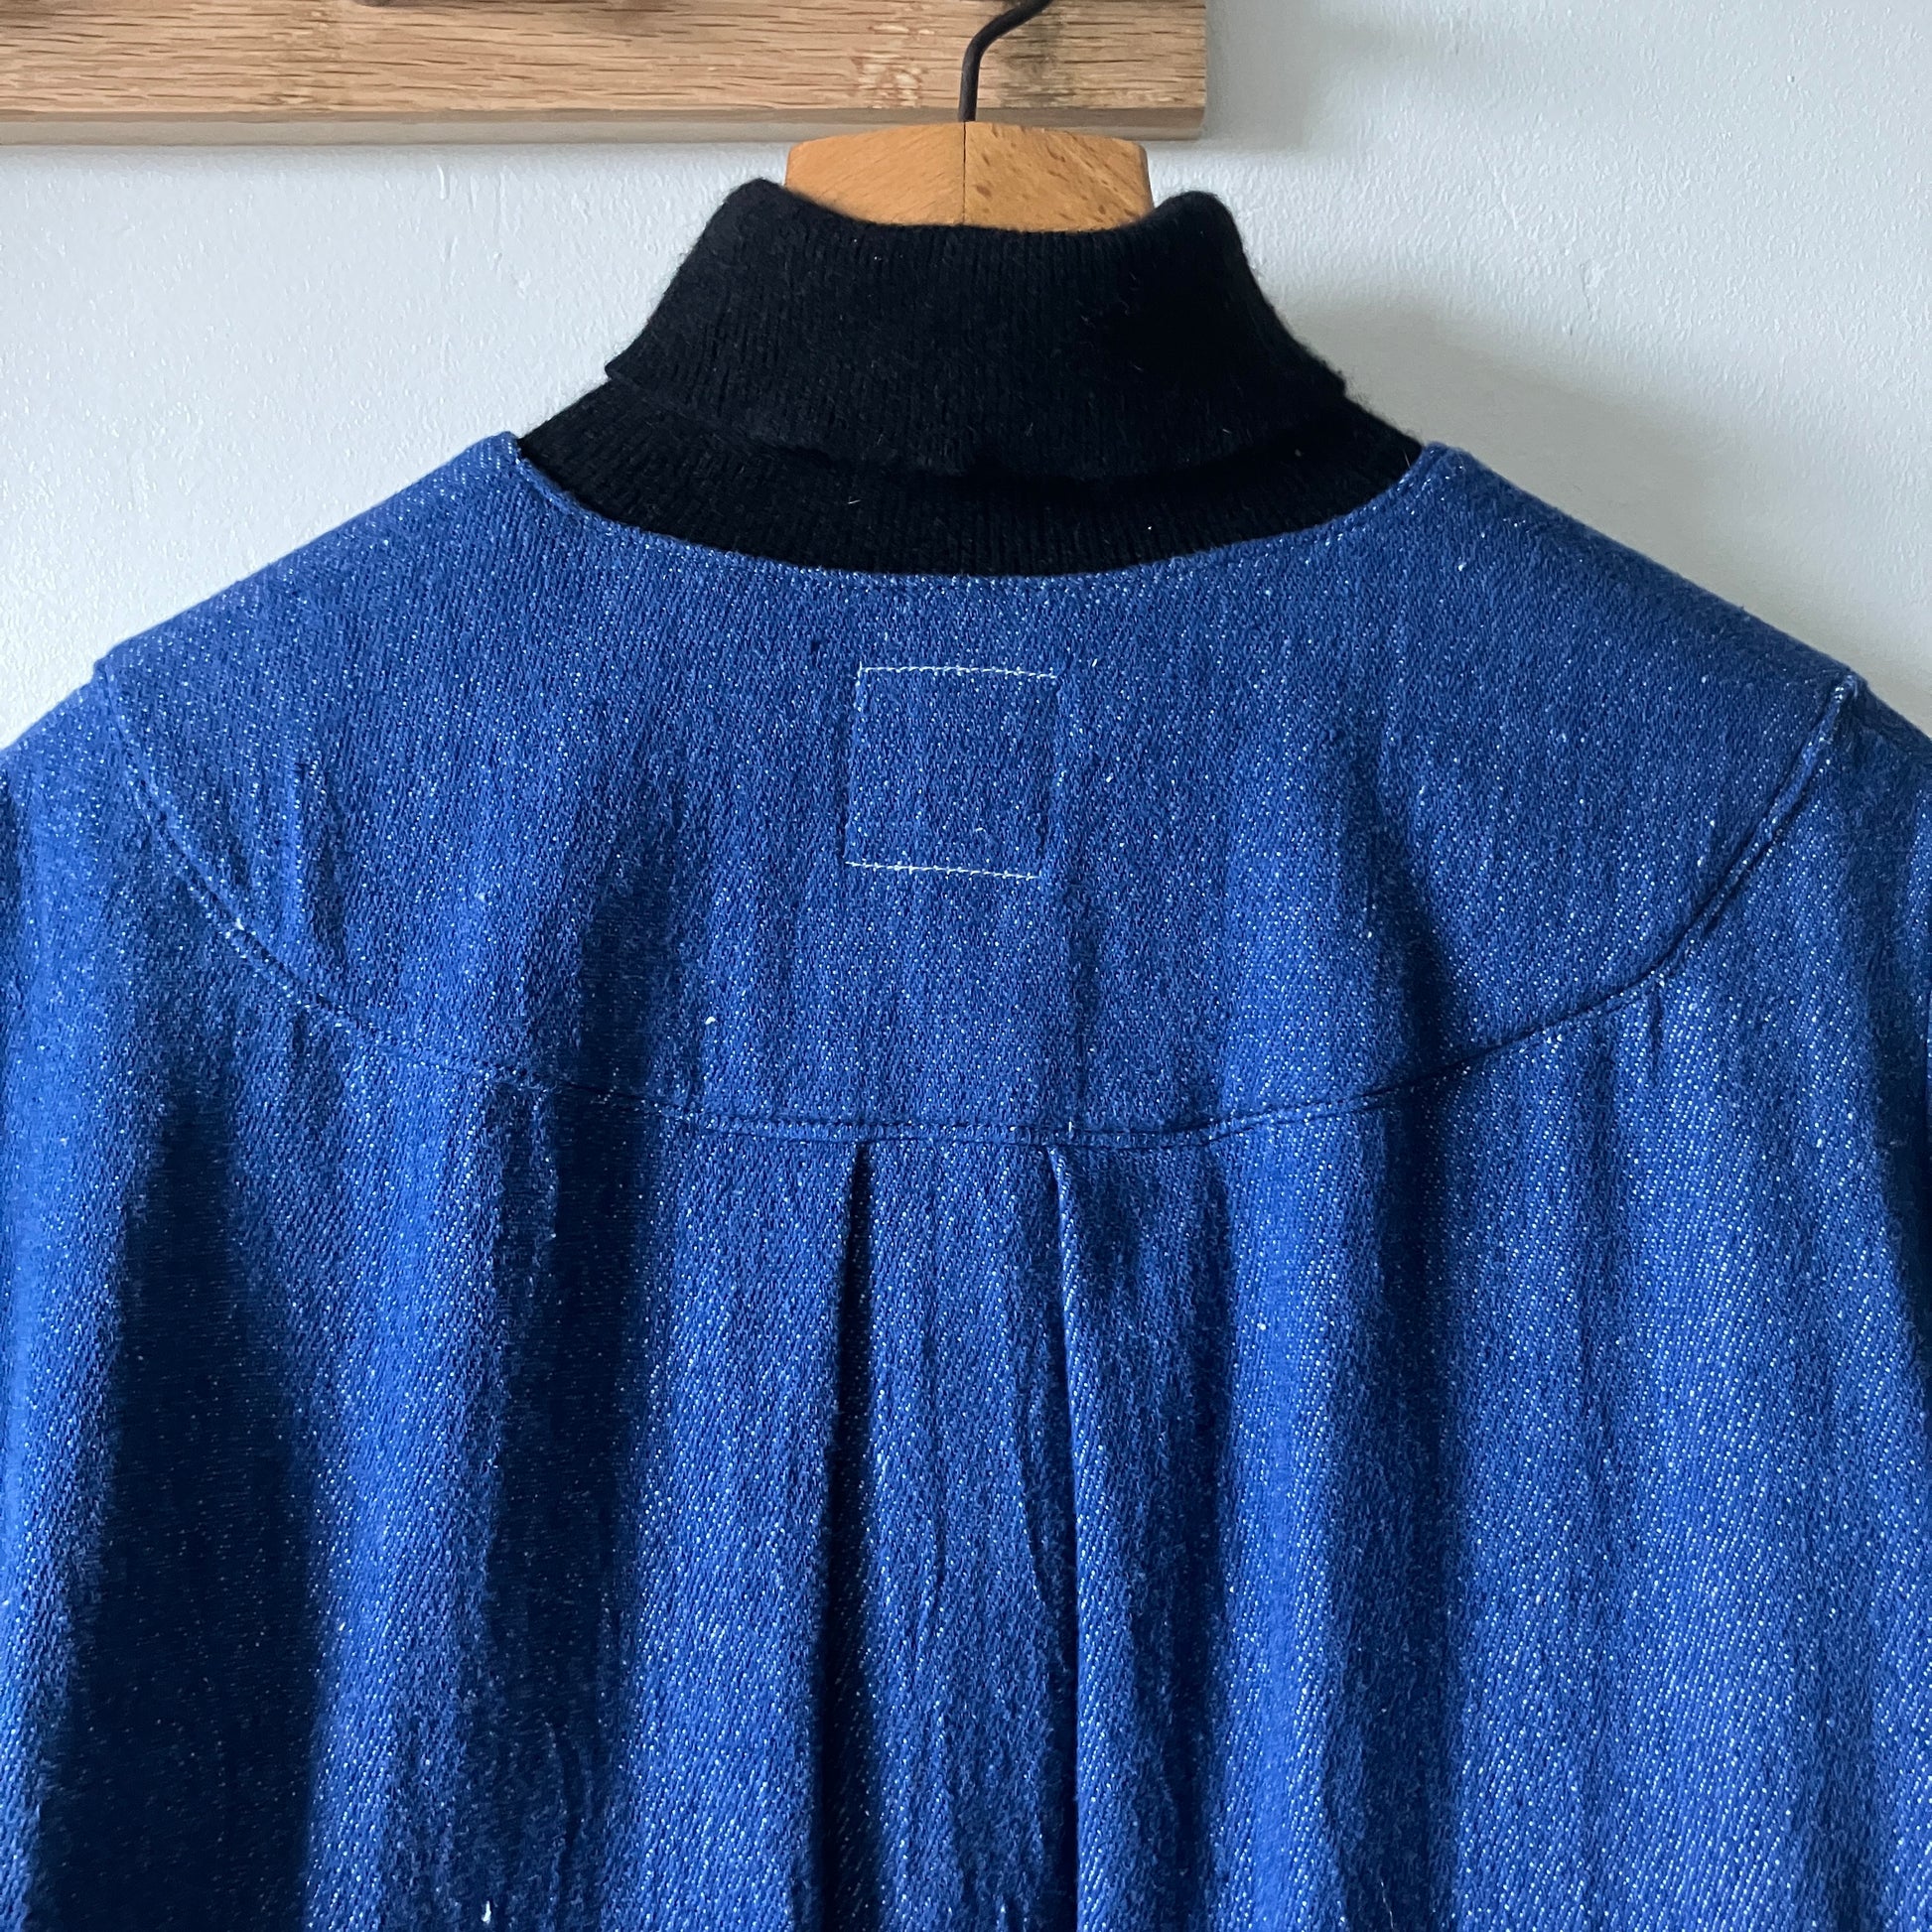 Smock top hand made from deadstock denim with thrifted patchwork hexagons on the pockets